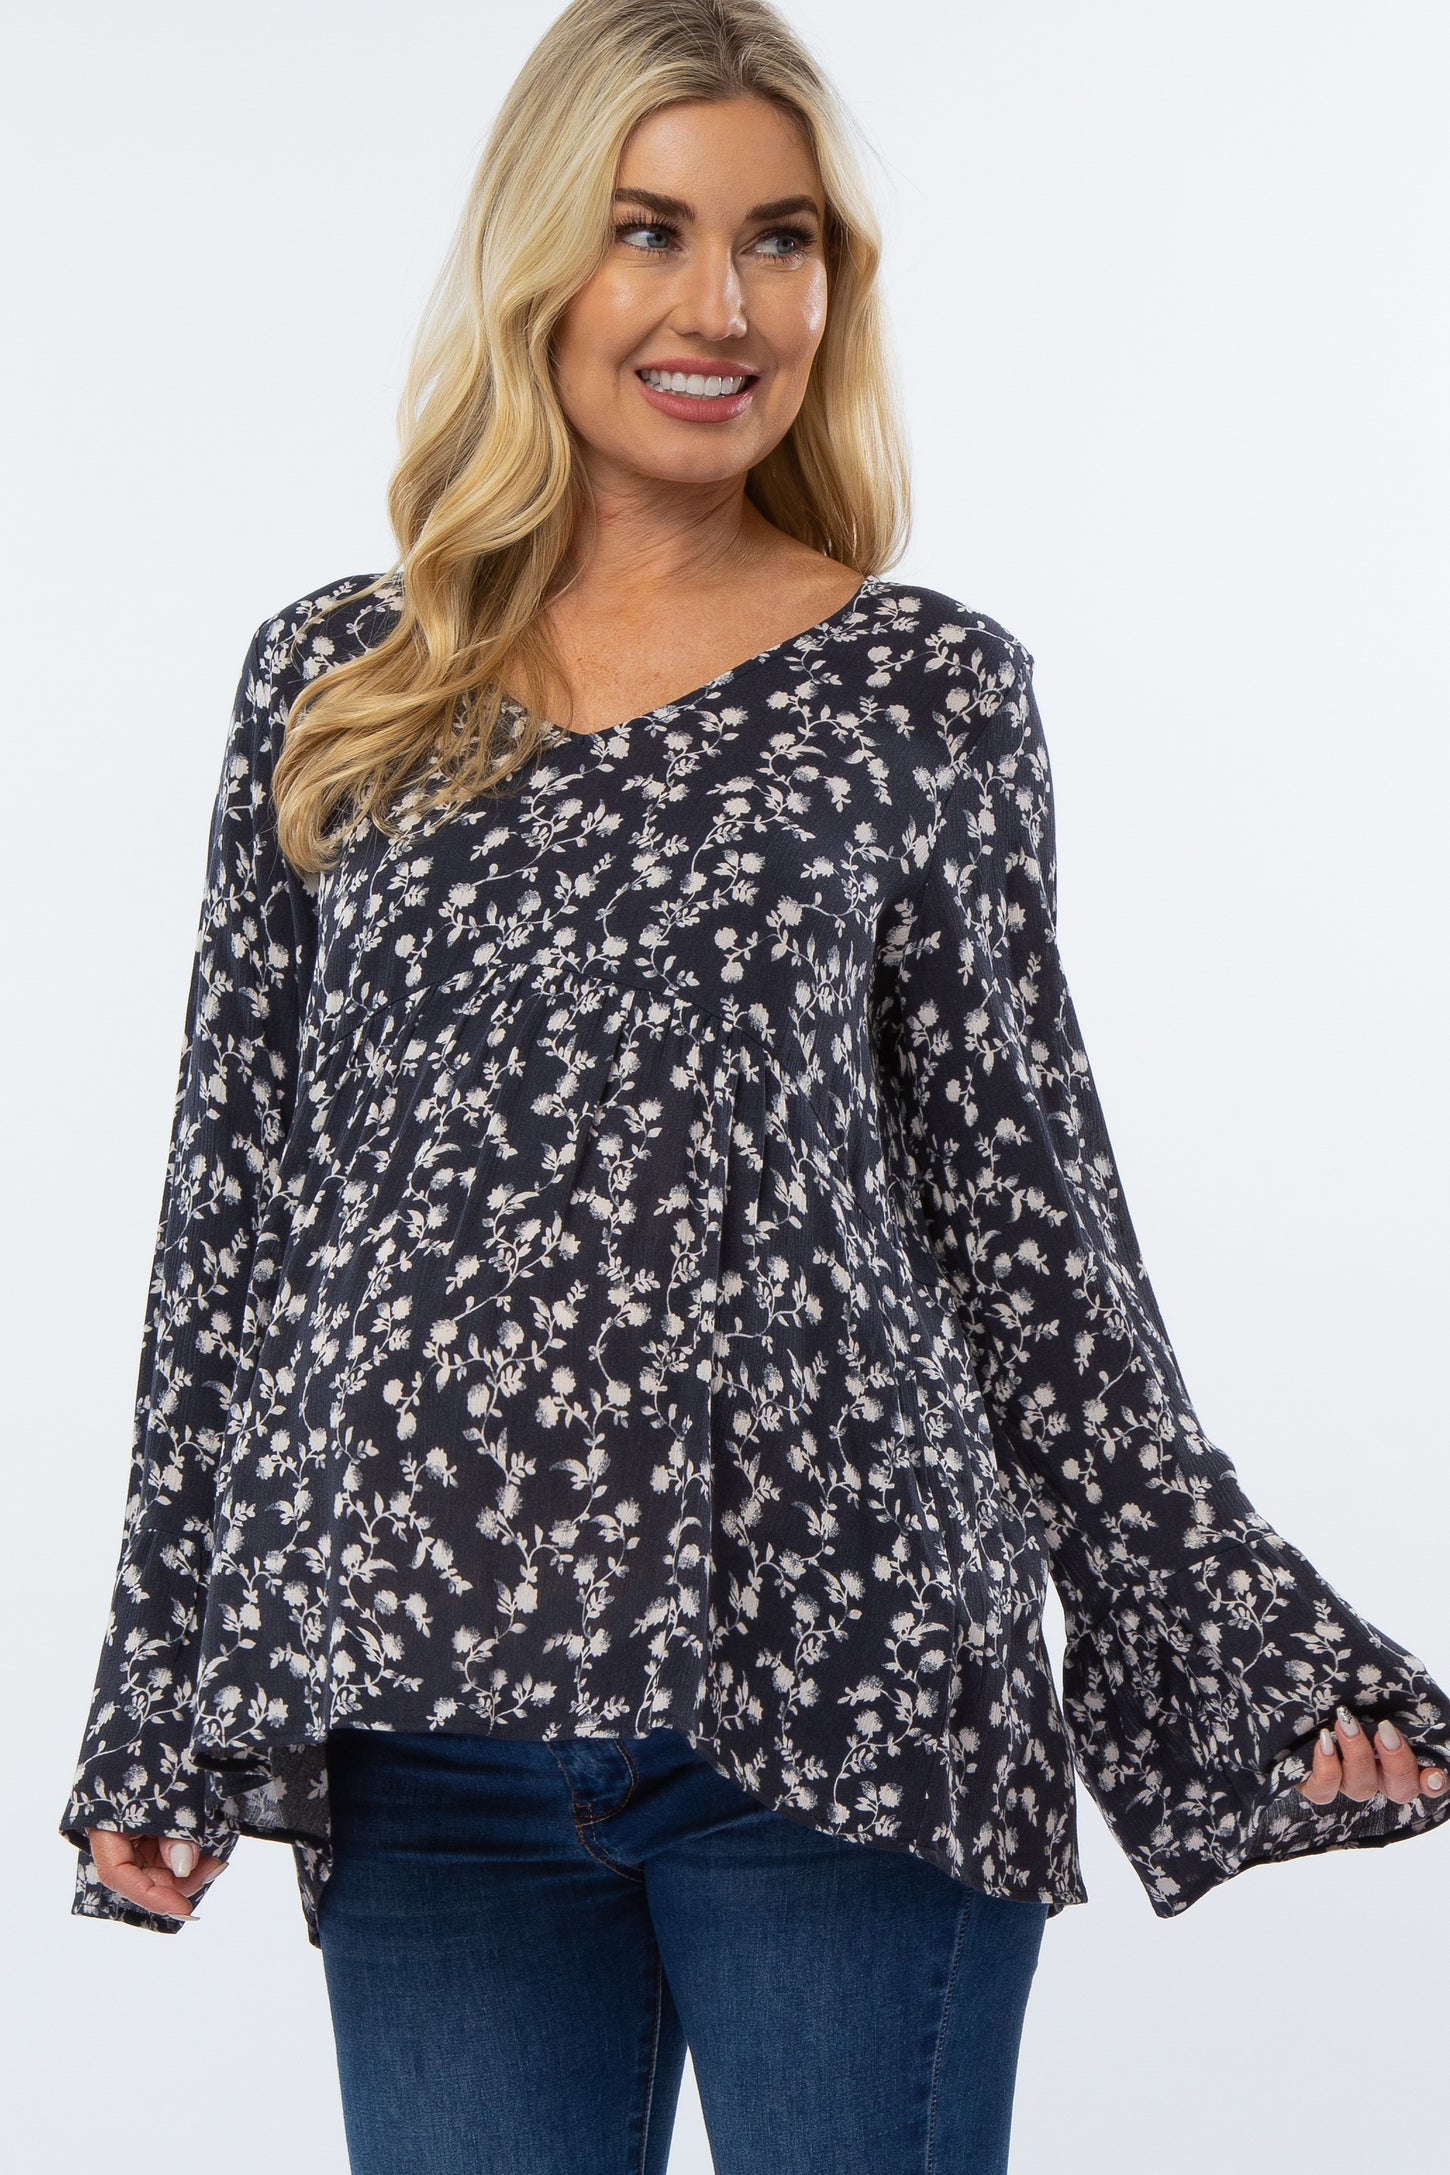 Navy Blue Floral Bell Sleeve Maternity Top